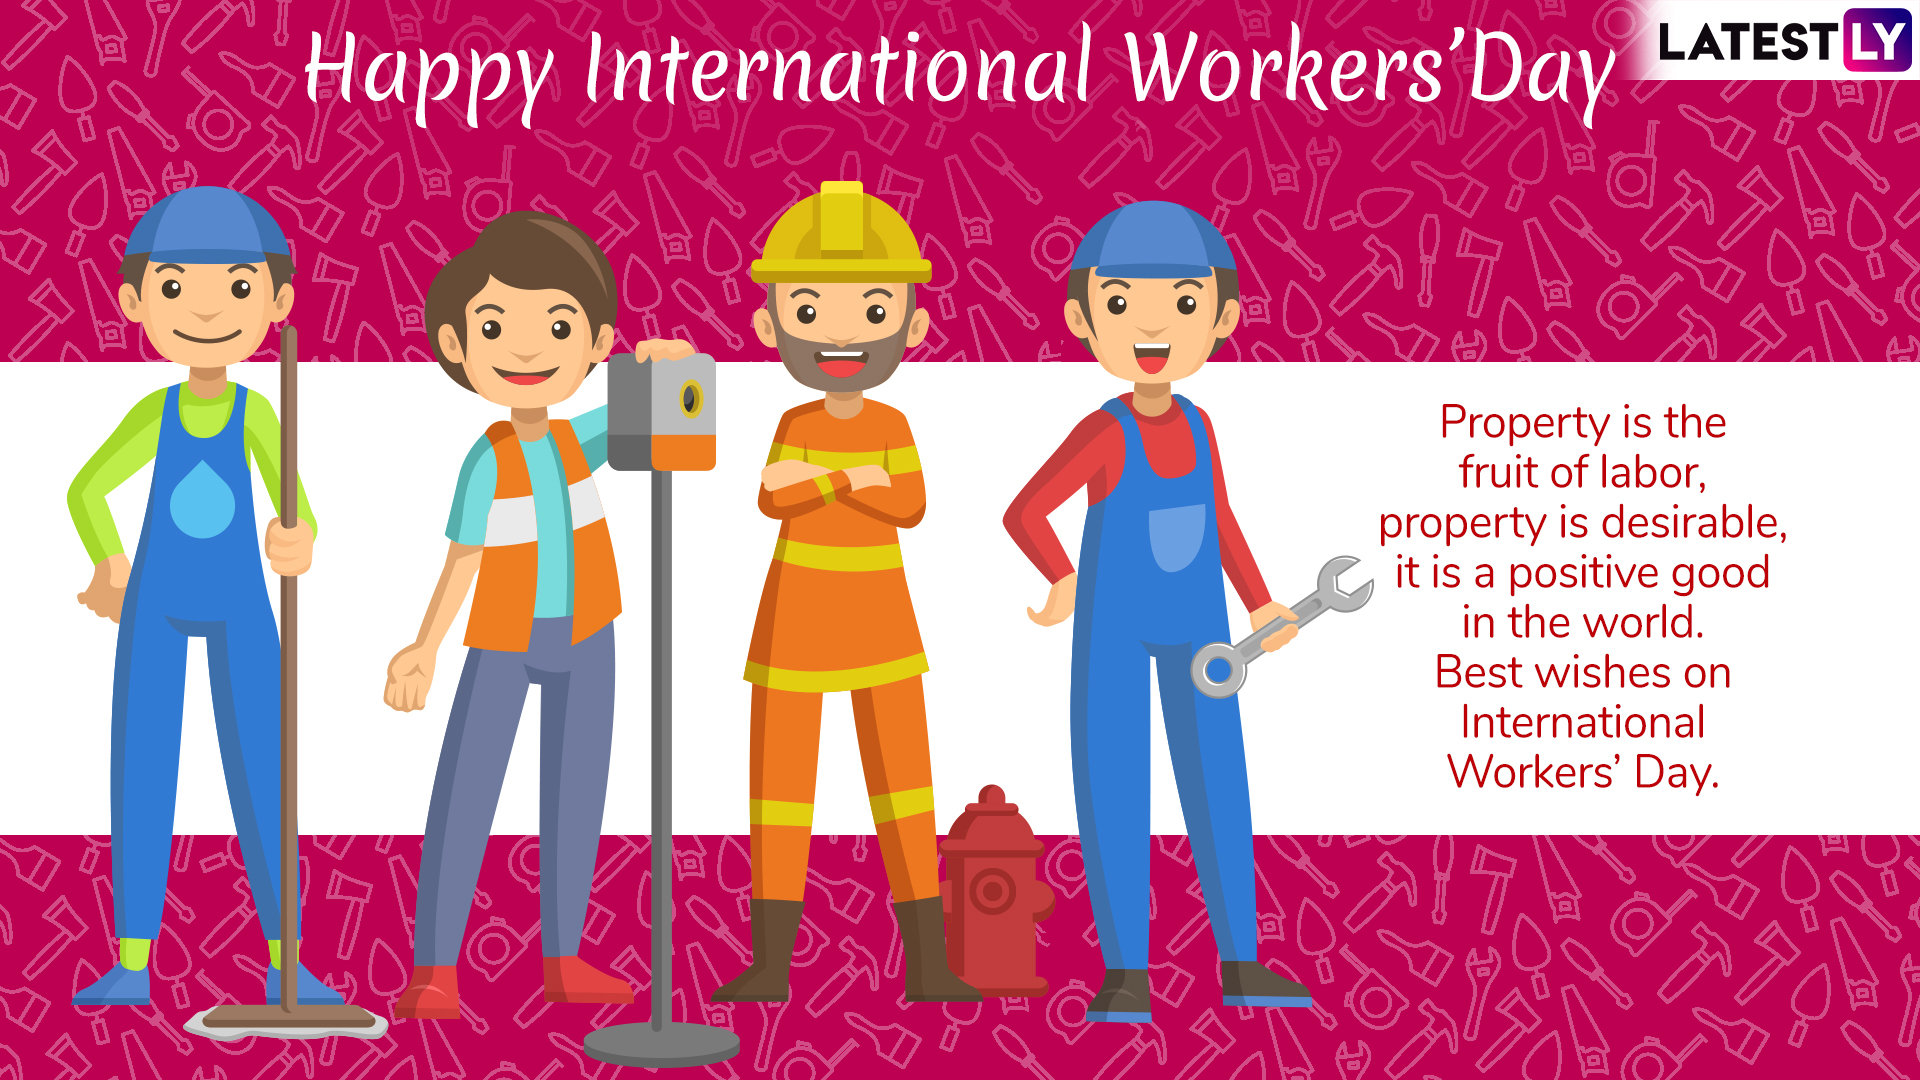 International Workers' Day 2022 Wishes & Images WhatsApp Stickers